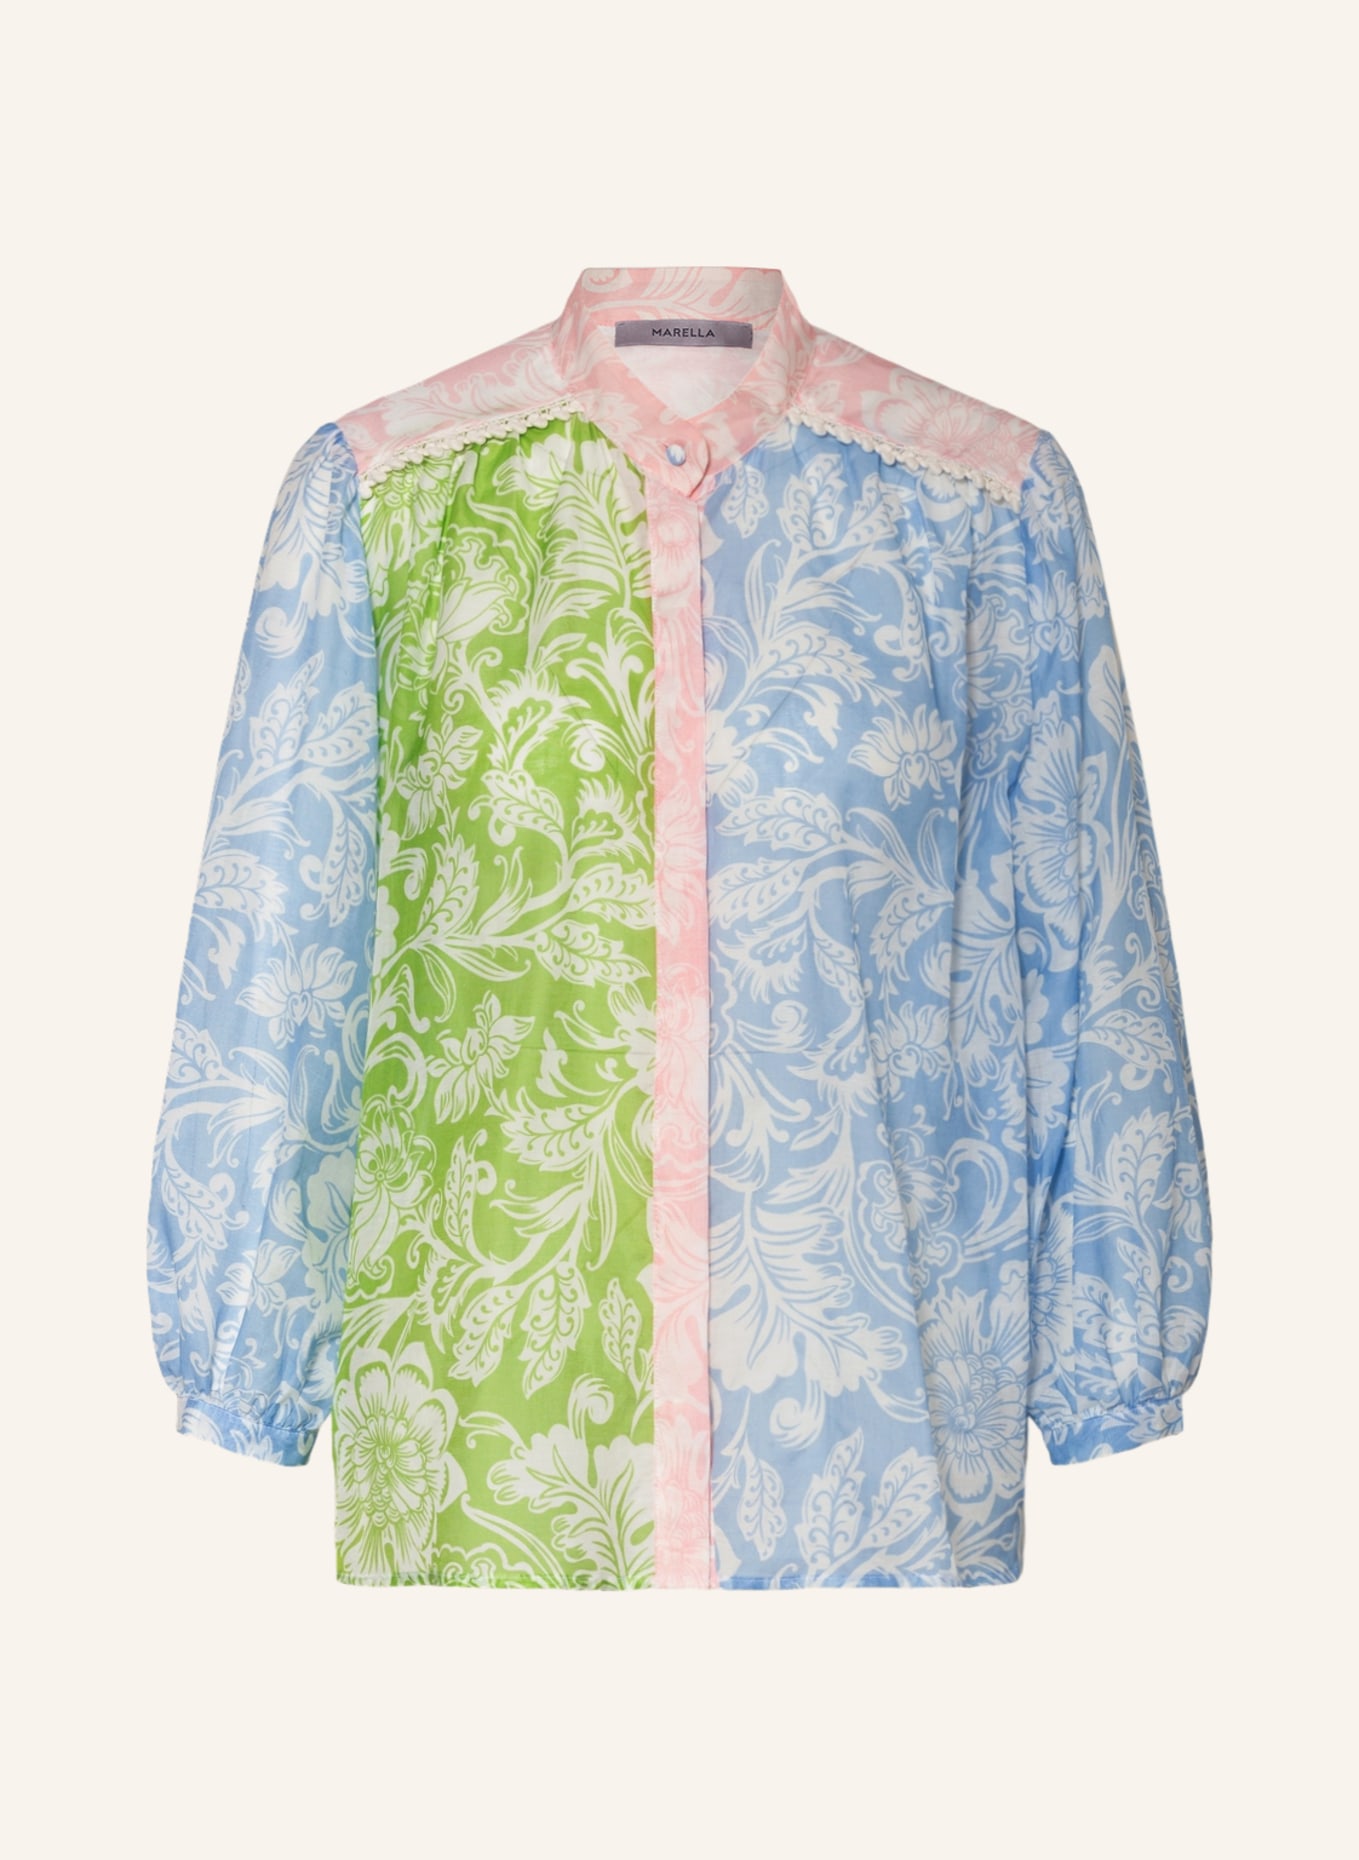 MARELLA Blouse DATTERO with 3/4 sleeves, Color: LIGHT BLUE/ DUSKY PINK/ LIGHT GREEN (Image 1)